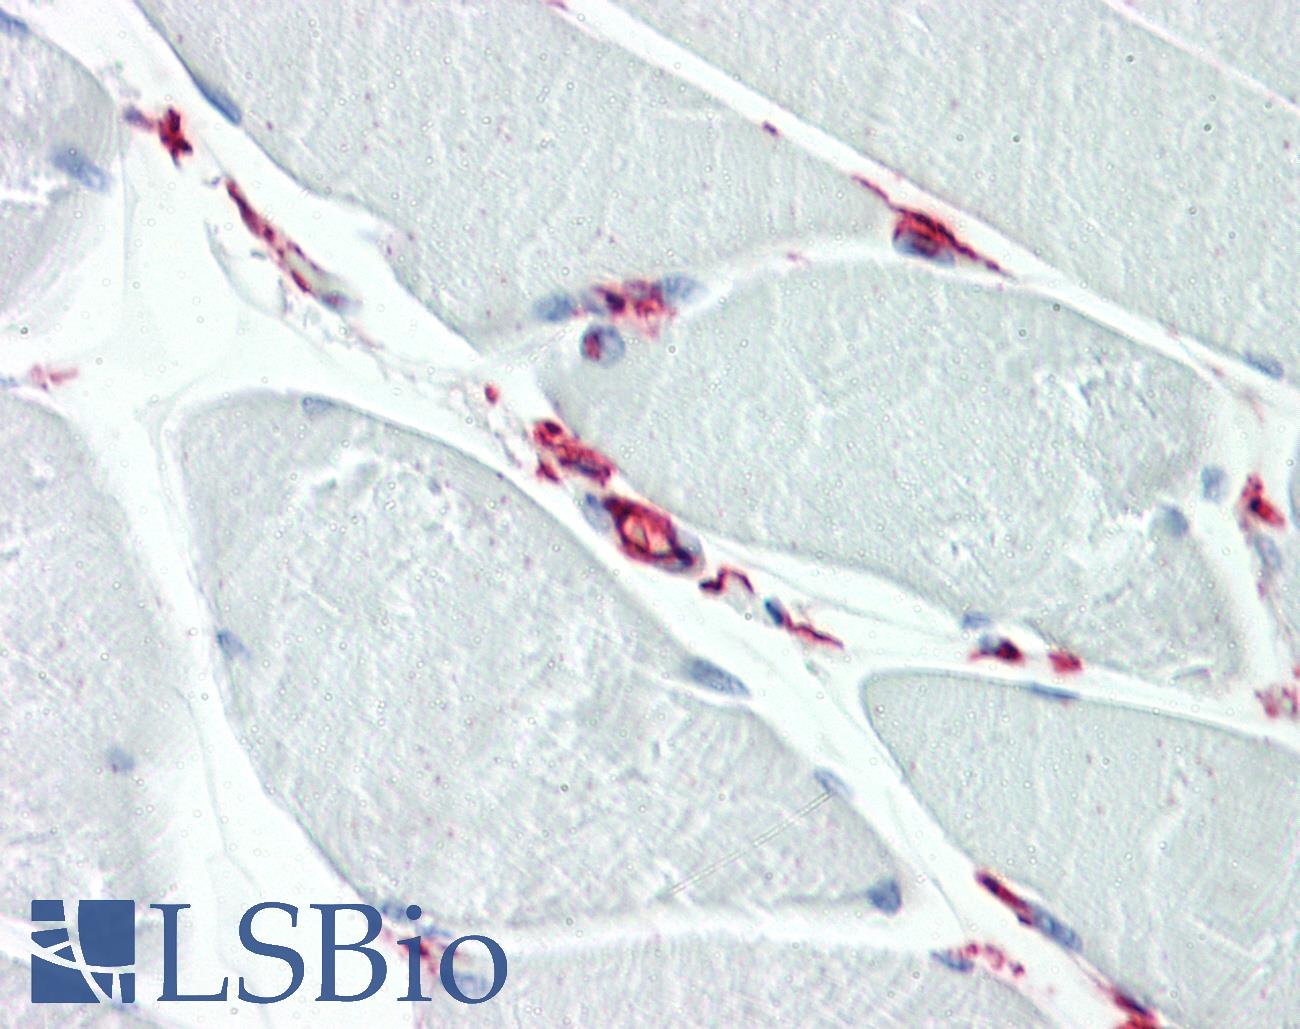 CD34 Antibody - Human Skeletal Muscle: Formalin-Fixed, Paraffin-Embedded (FFPE)